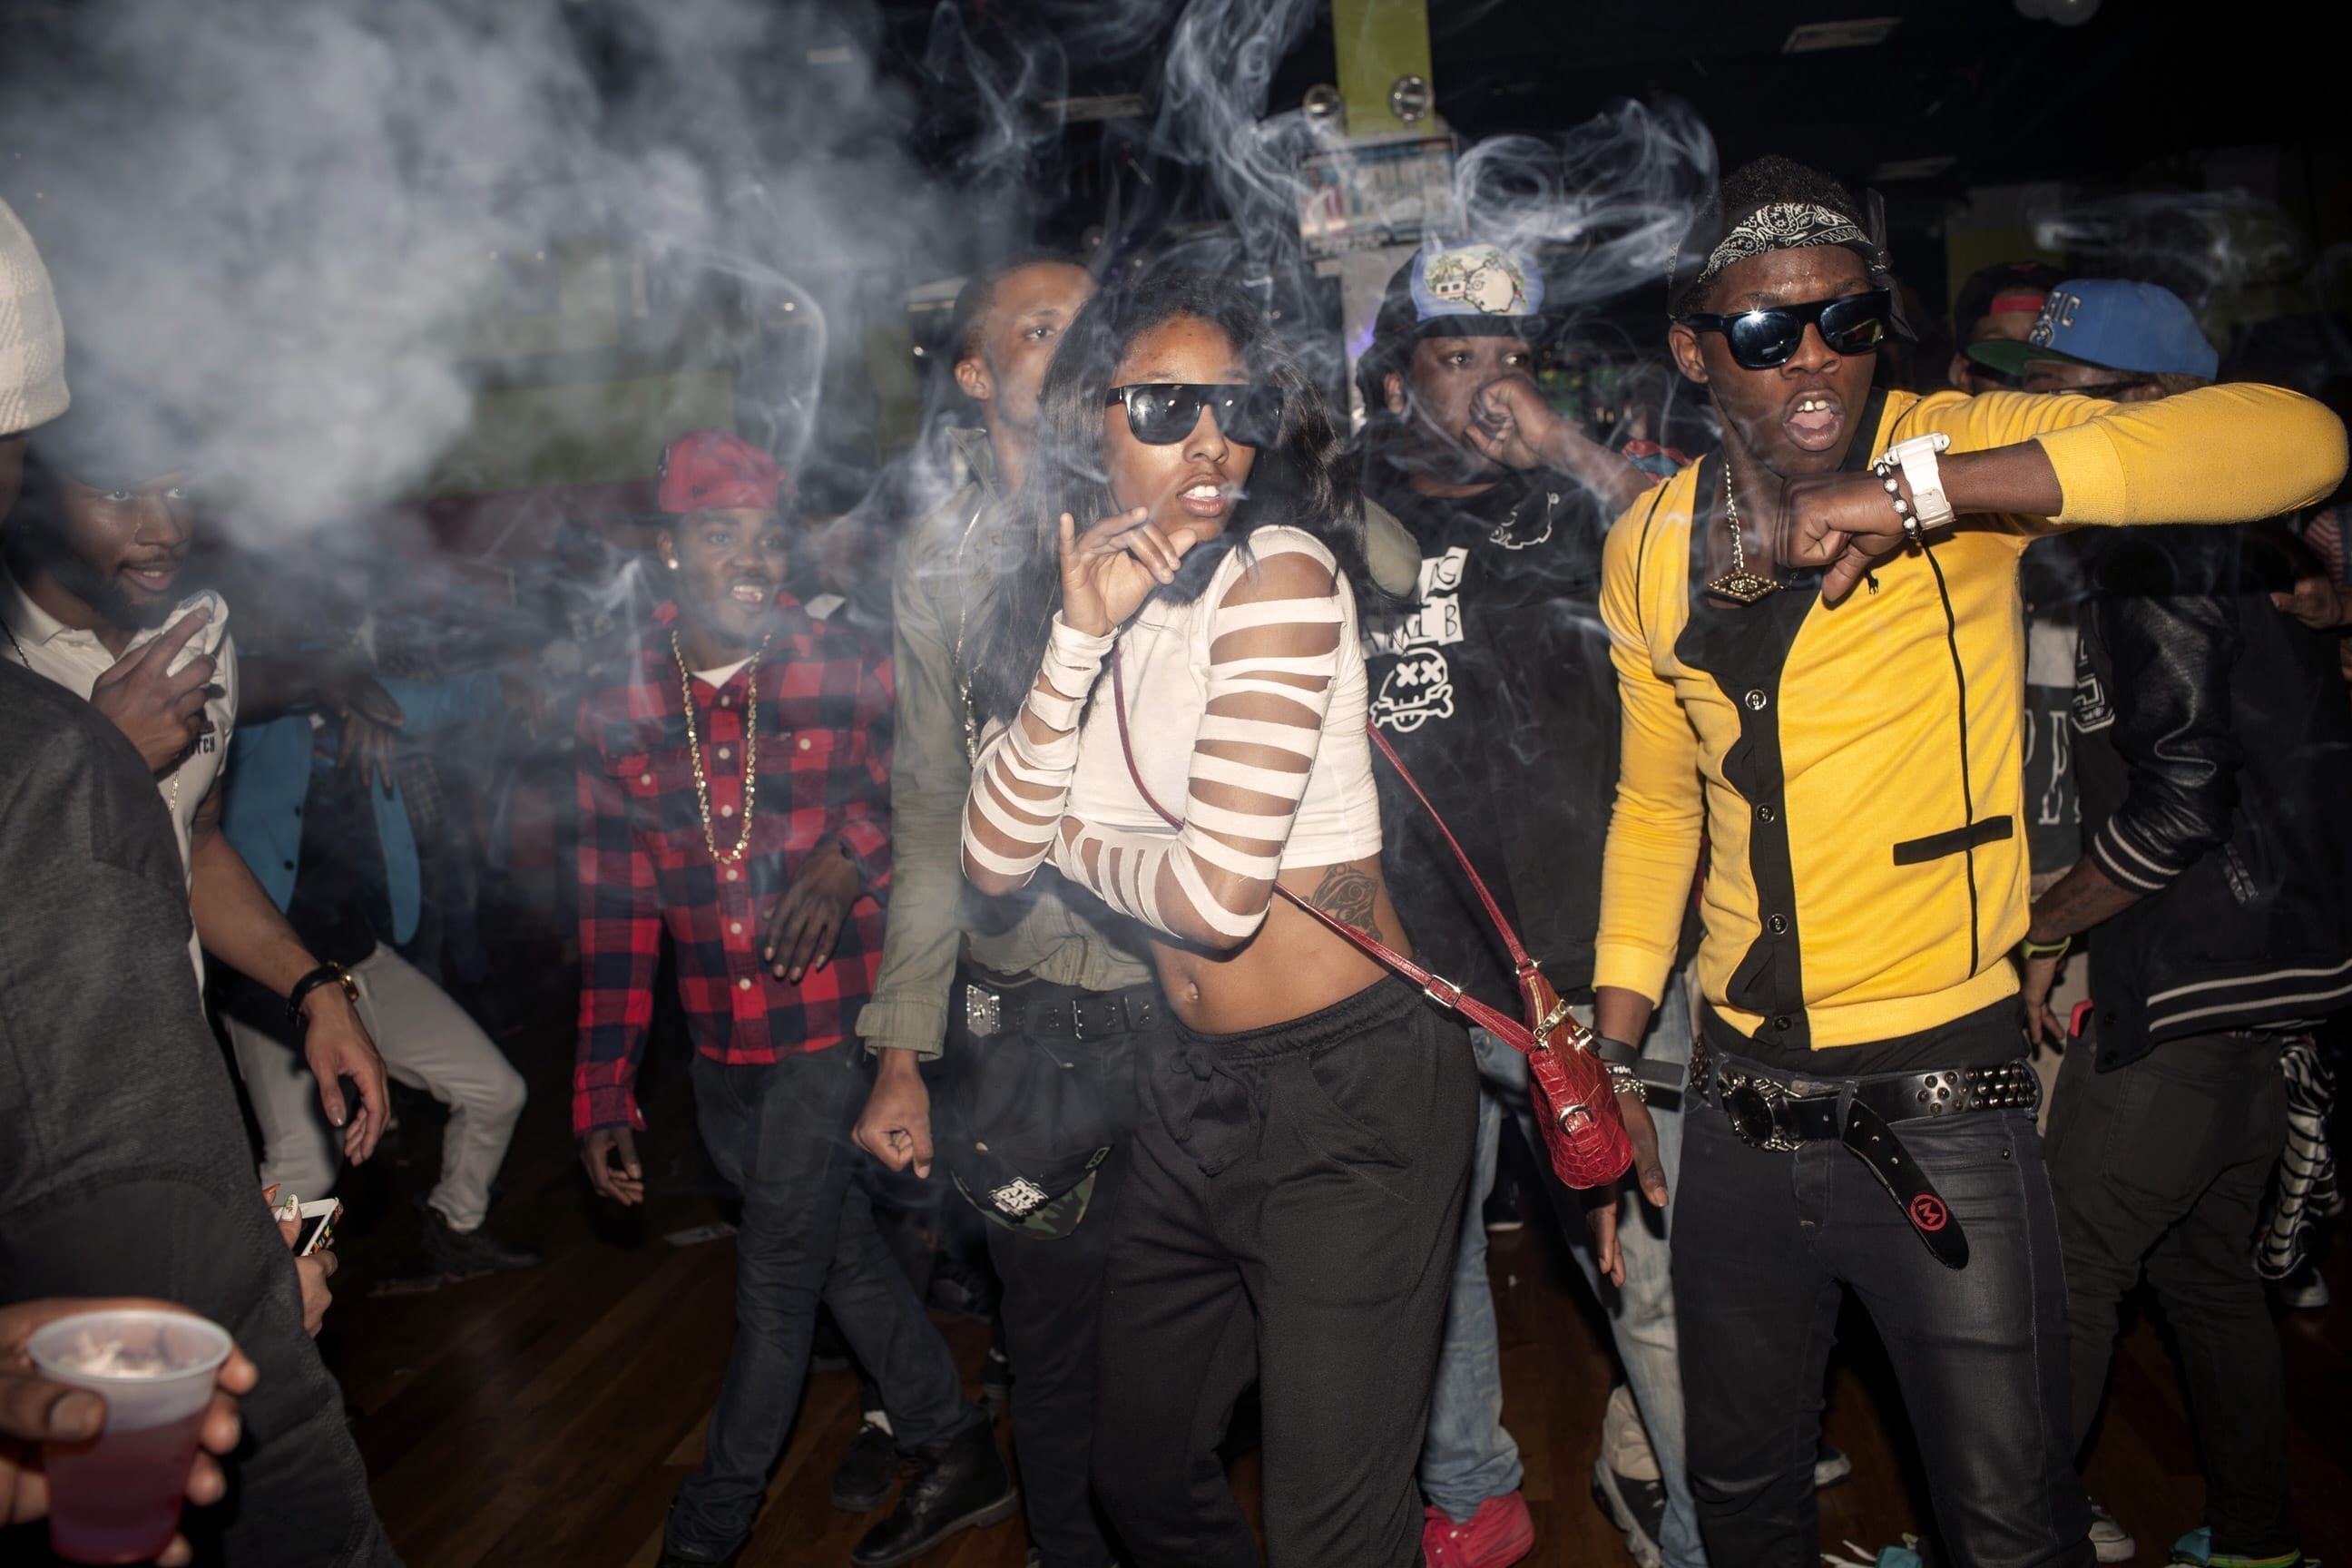 22nd March, 2013. East Flatbush, Brooklyn. The Flavor Essence dance team moves through its choreography in unison as smoke clouds the air in a nightclub around 3am on a Thursday night. 